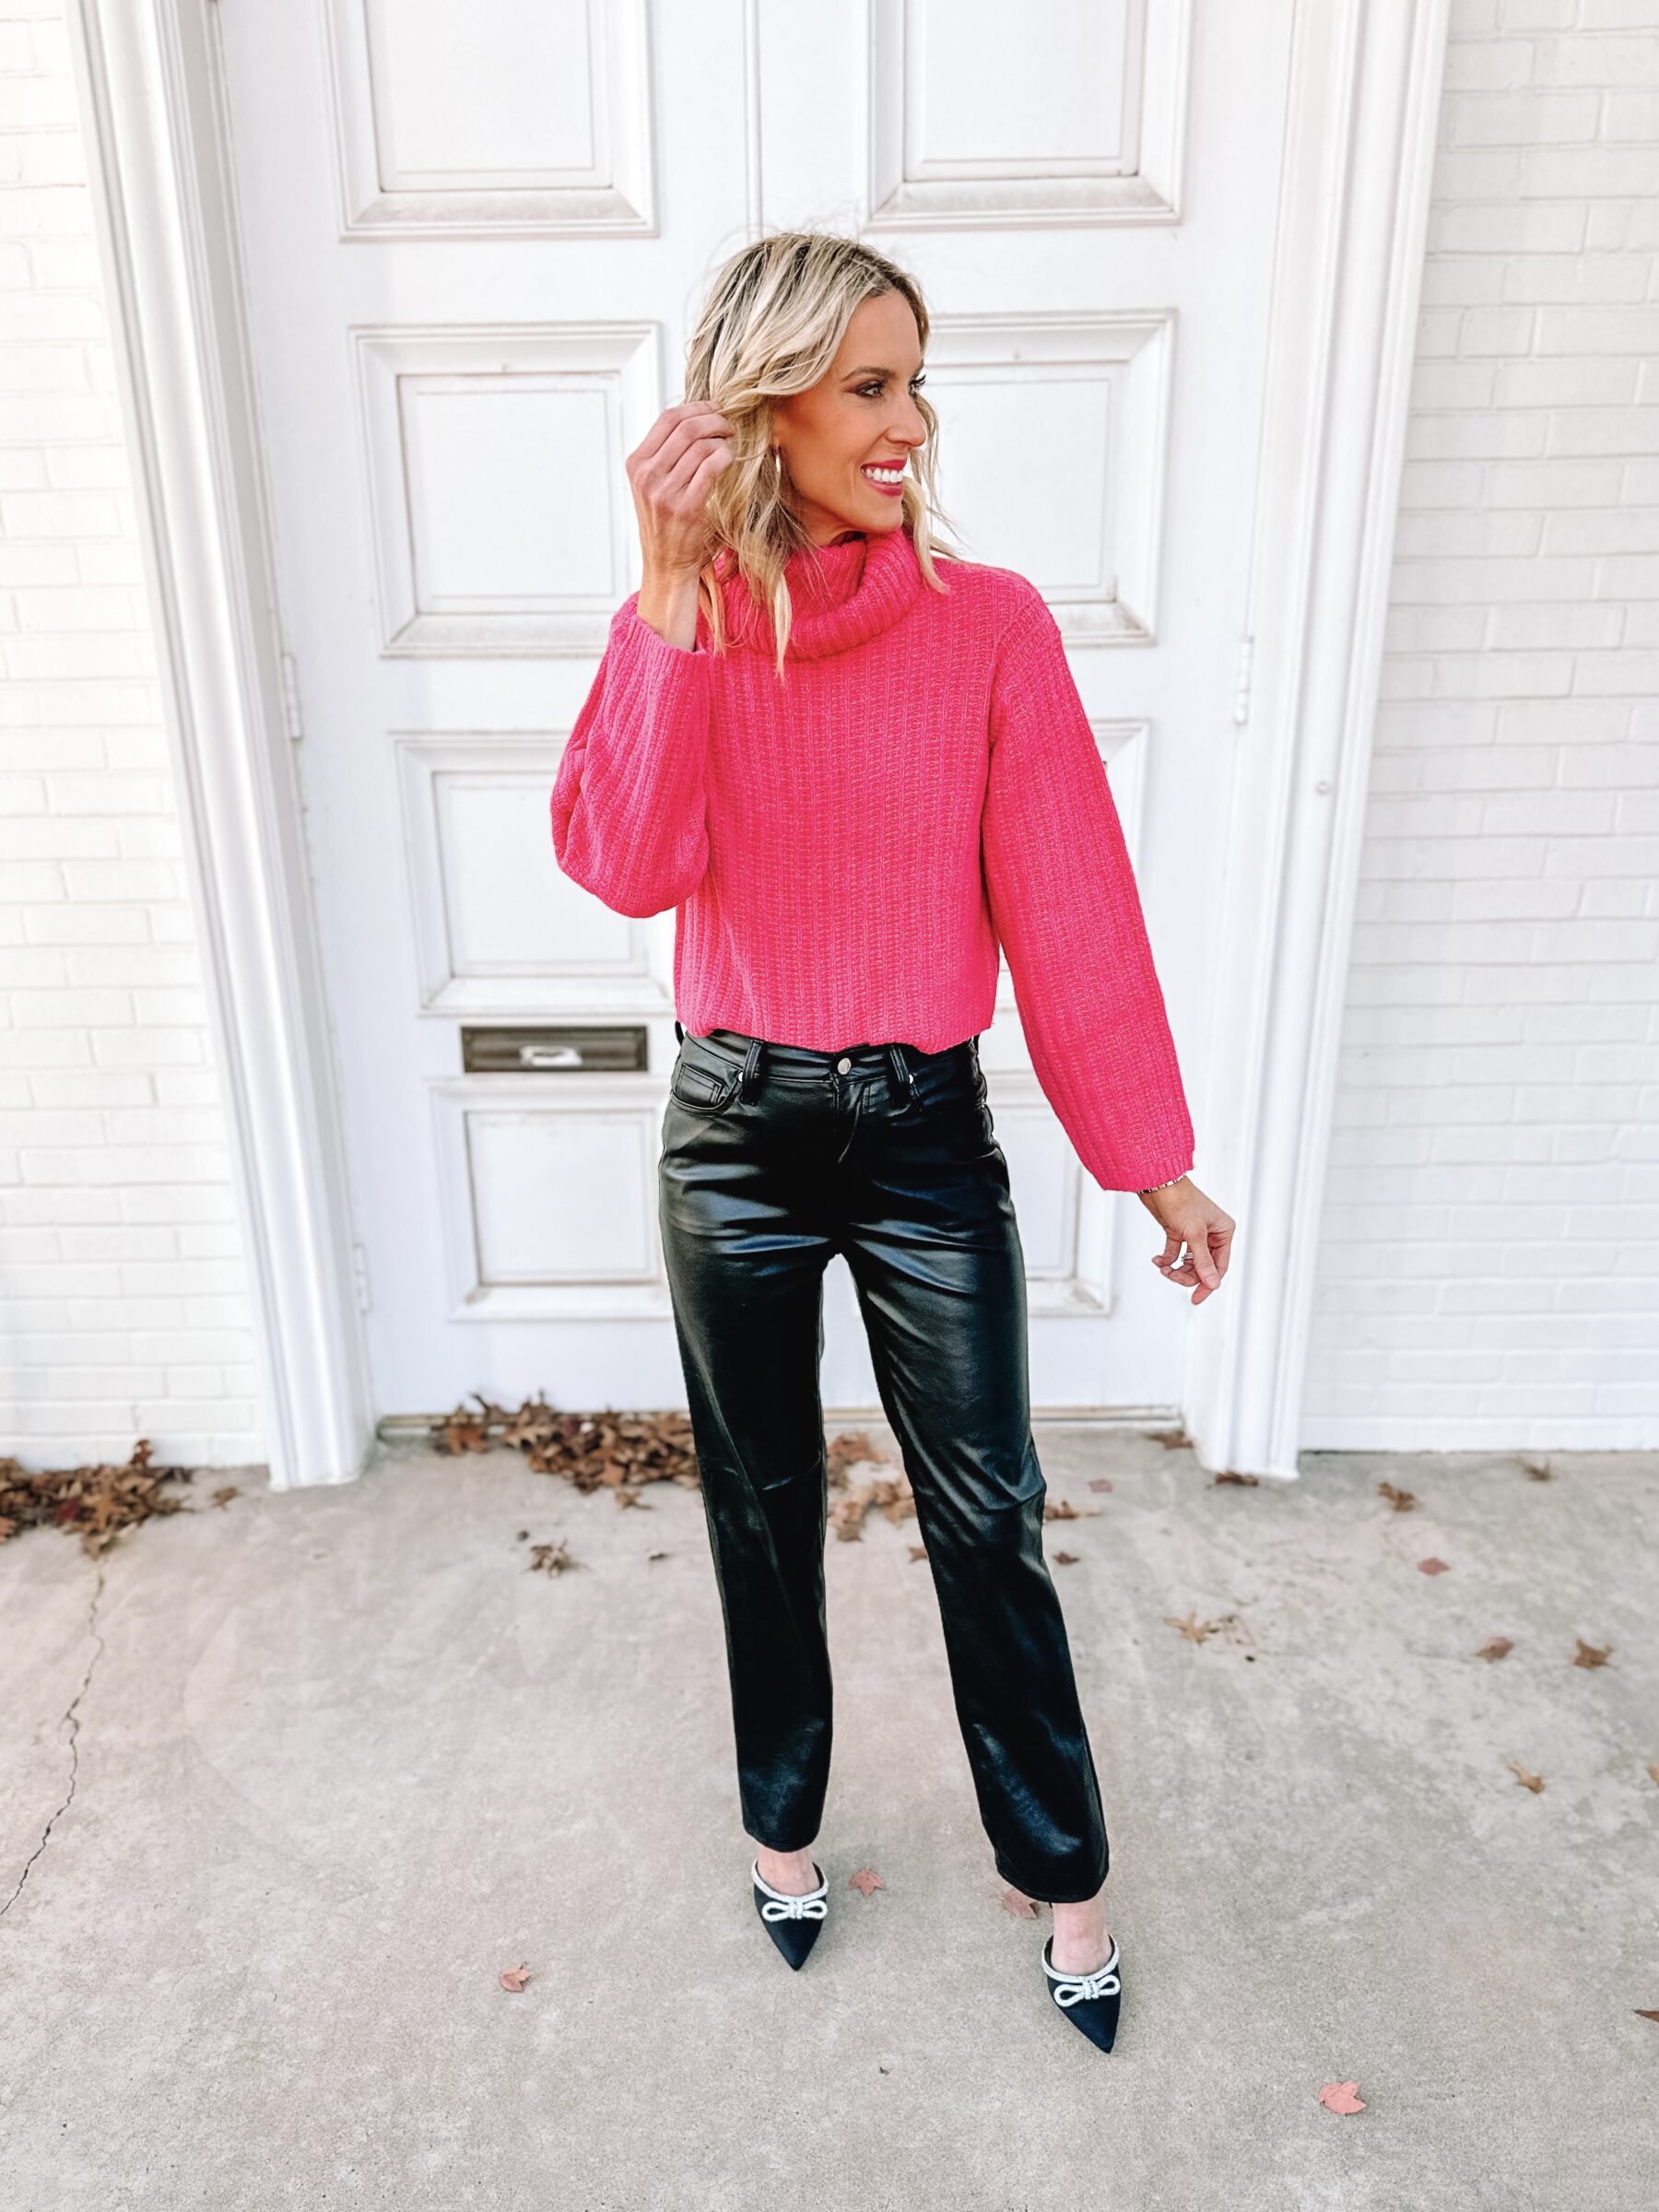 Leather Pants Outfit Ideas  Leather Pants Outfit Going Out